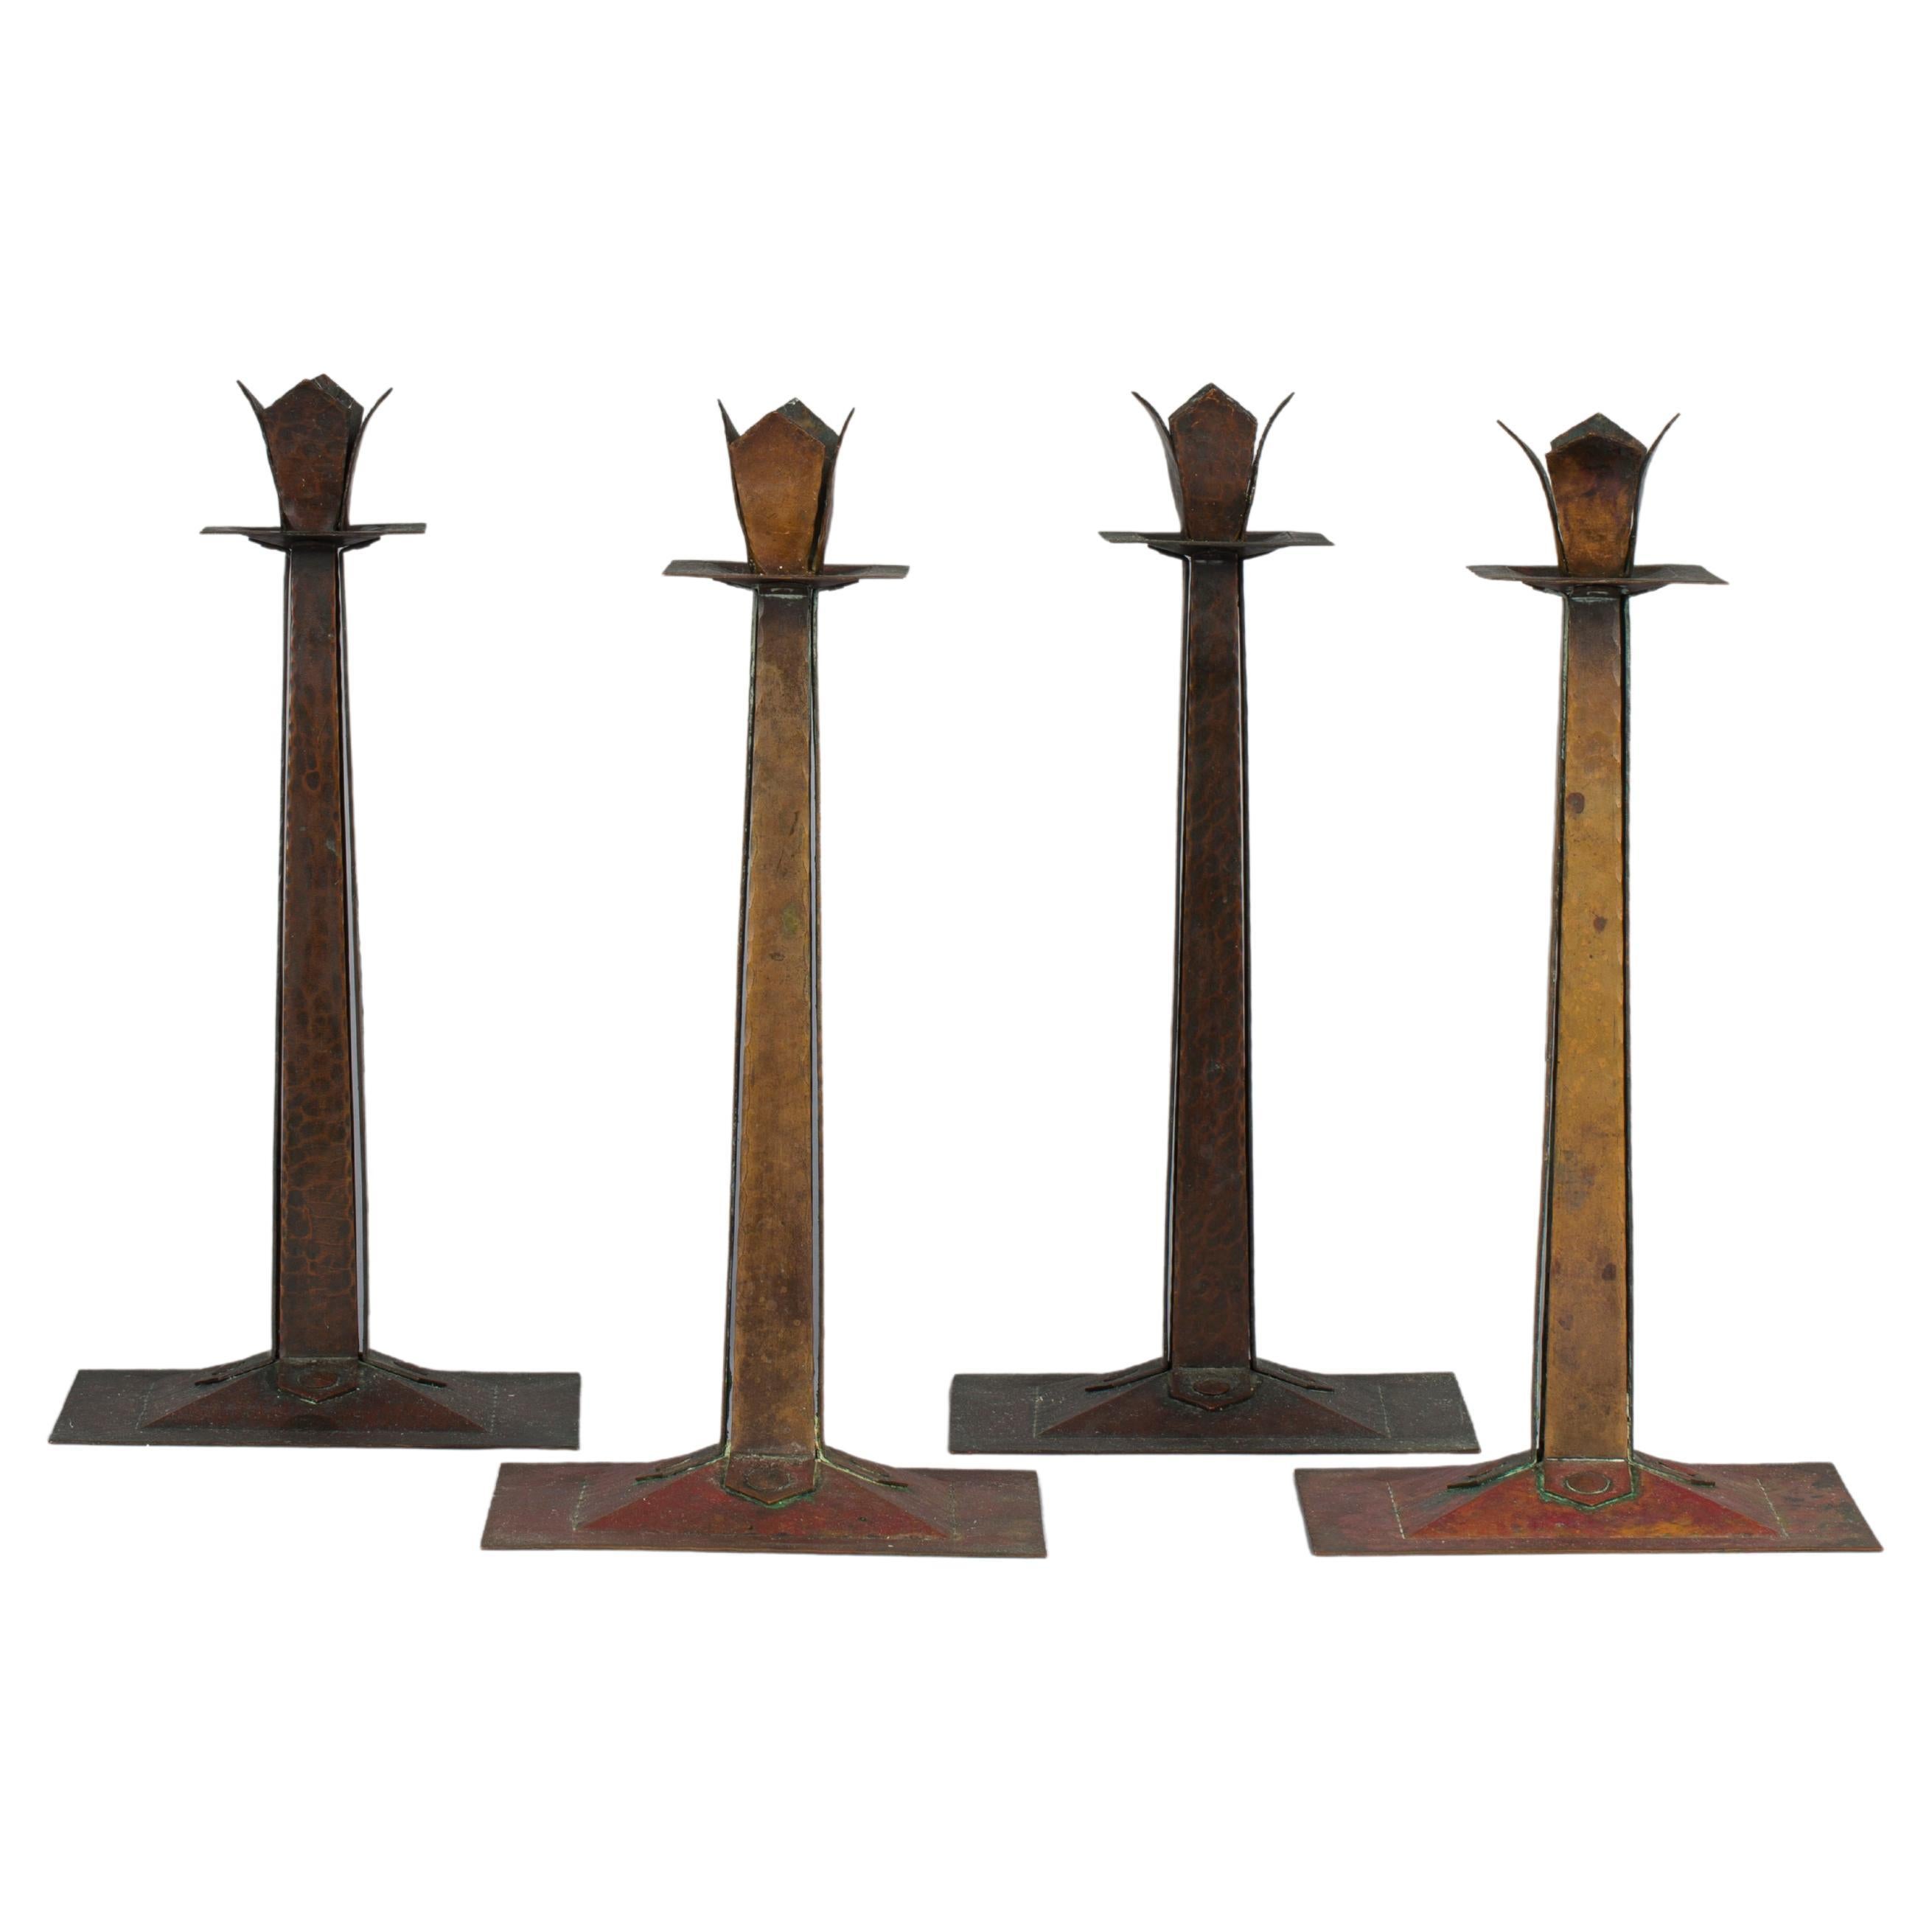 Set of Four Handwrought Copper Candlesticks by Gustav Stickley, circa 1905 For Sale